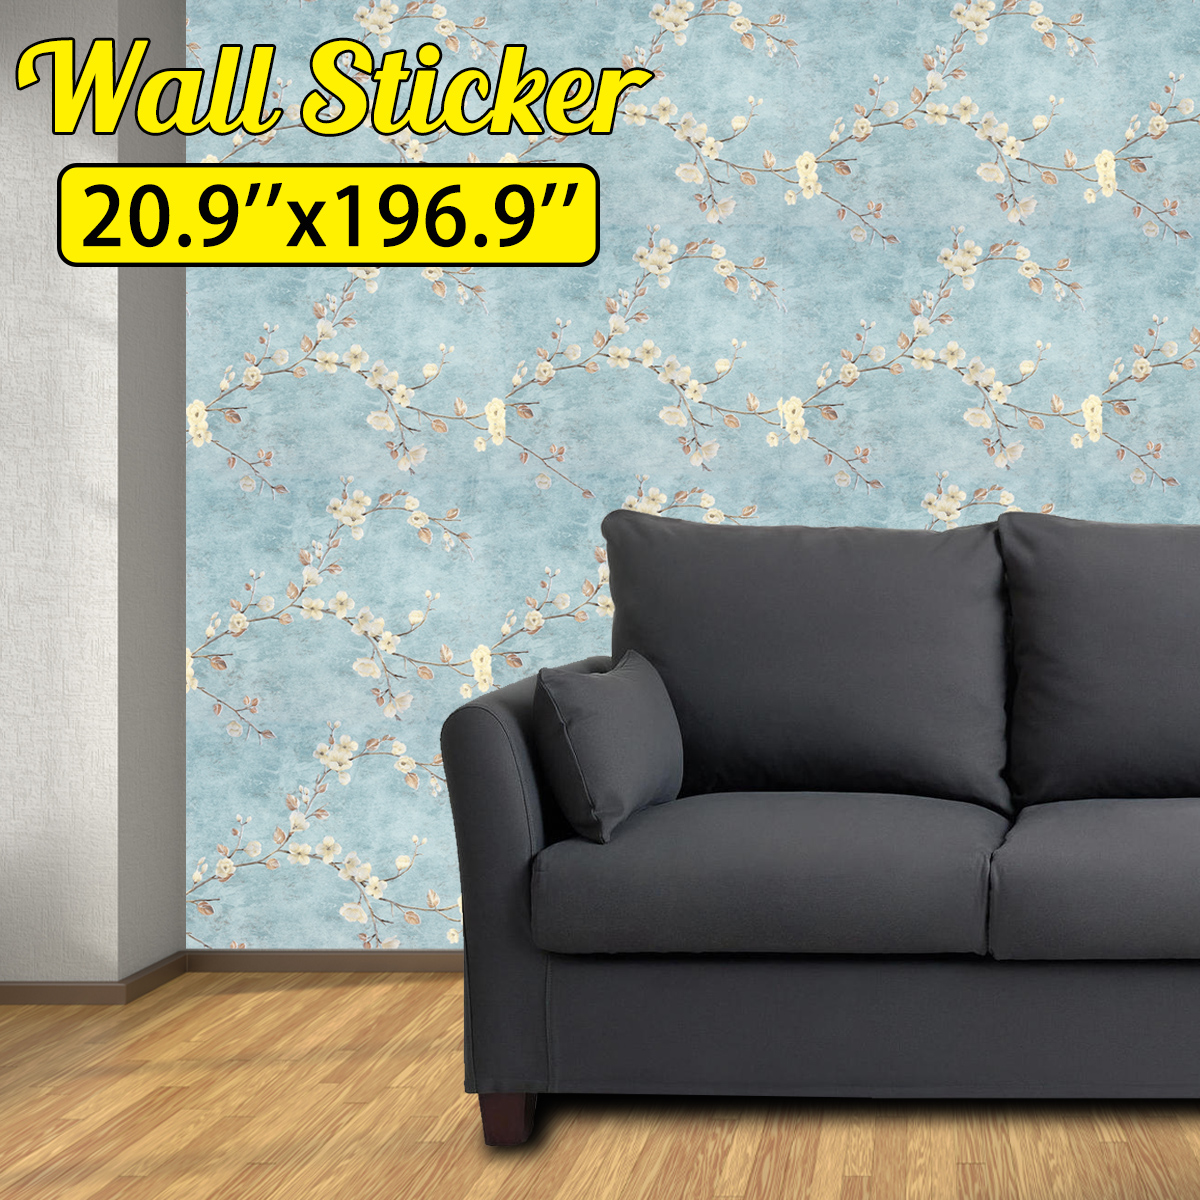 5M-Non-Woven-Wallpaper-Self-Adhesive-Bedroom-Warm-Dormitory-Tv-Background-Wall-Decoration-Room-Self--1859005-1